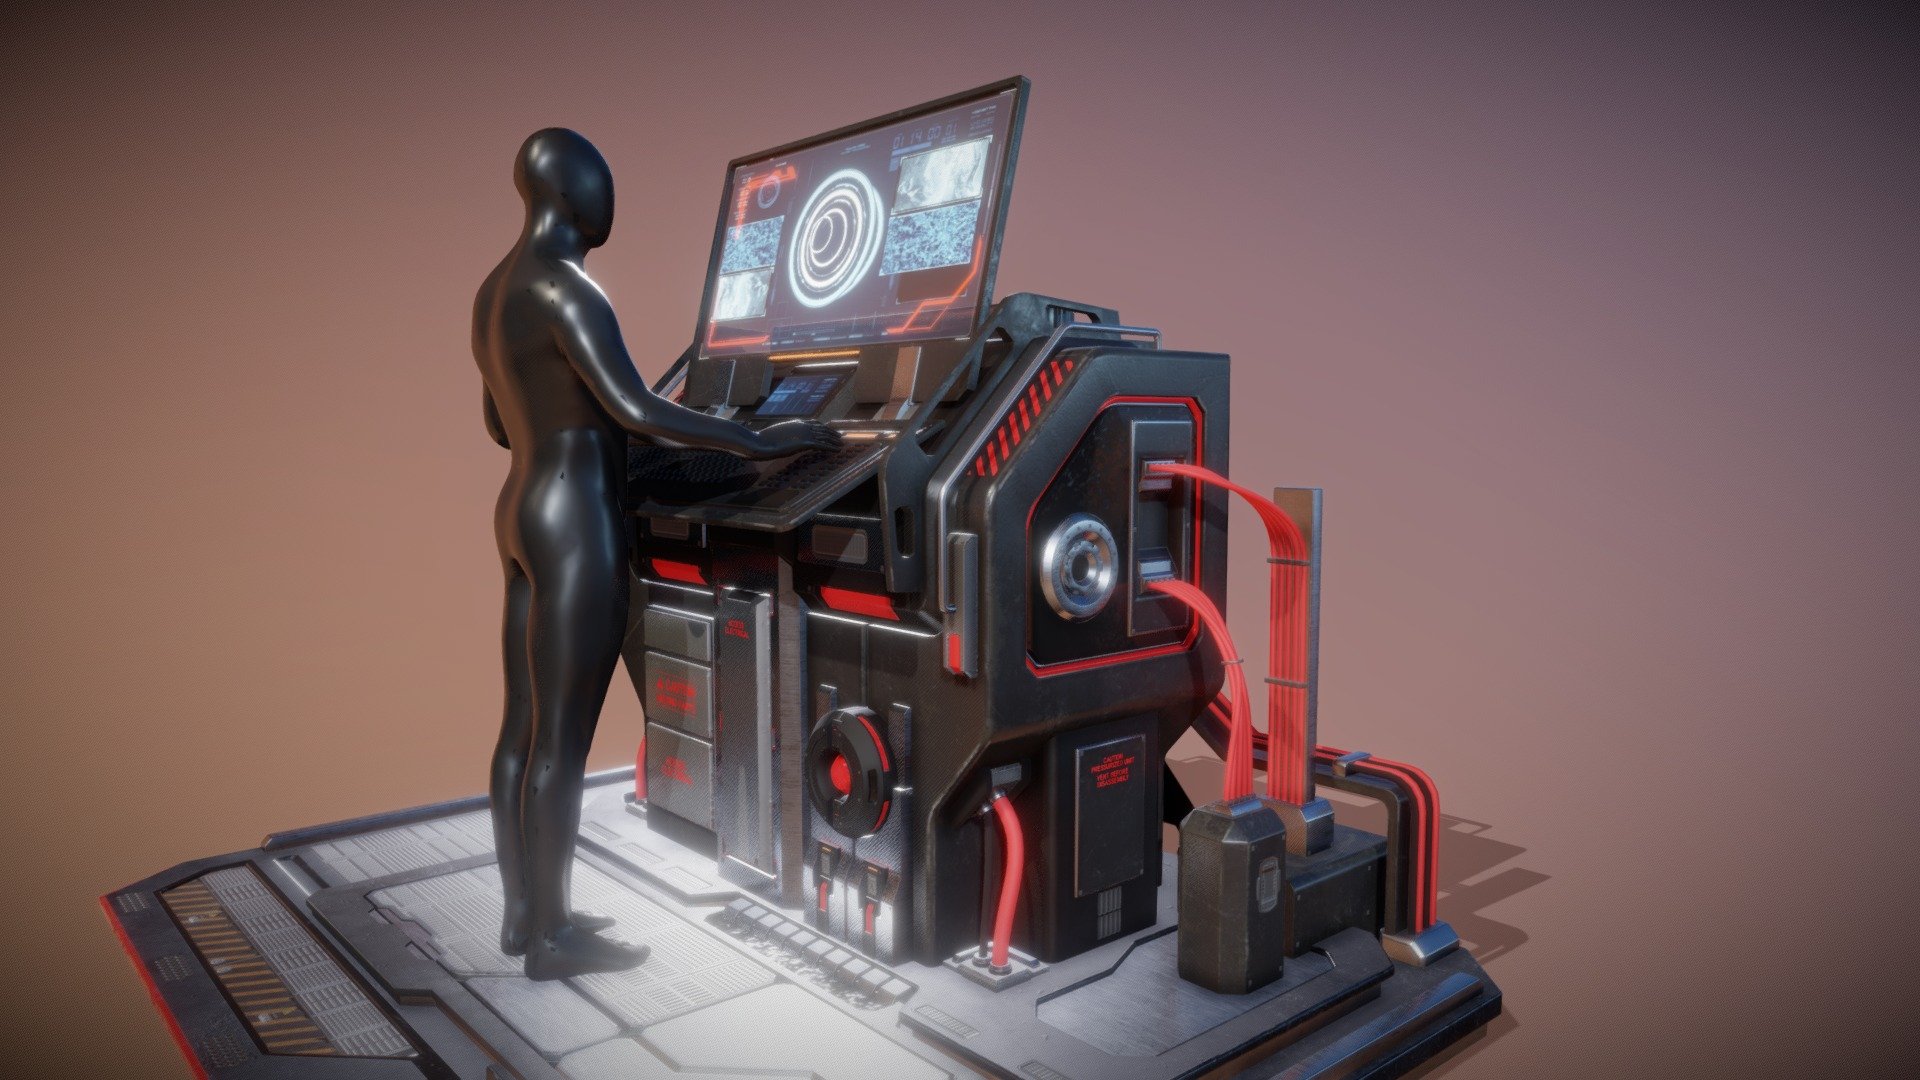 Sci Fi Computer Work Station 3d Model By Dhieen Dhieen 2486244